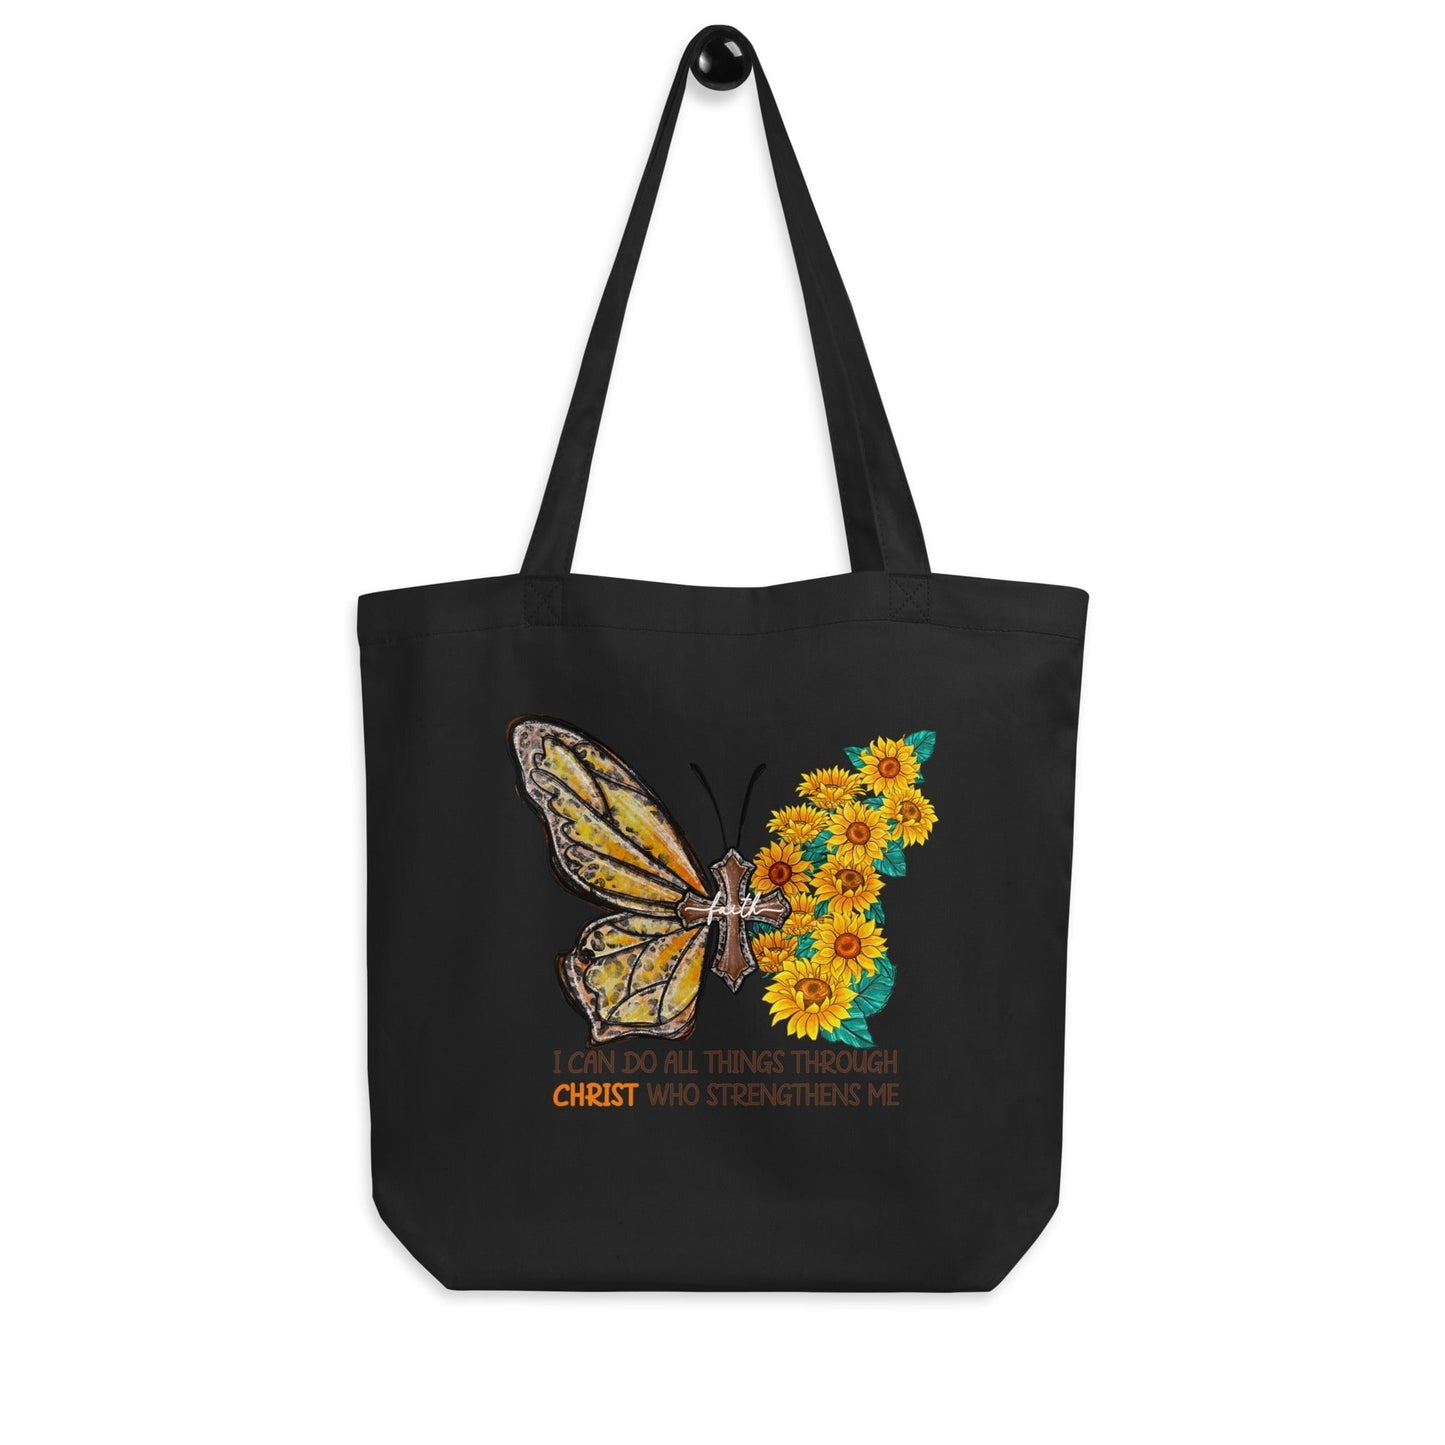 I Can do all things through Christ Tote Bag